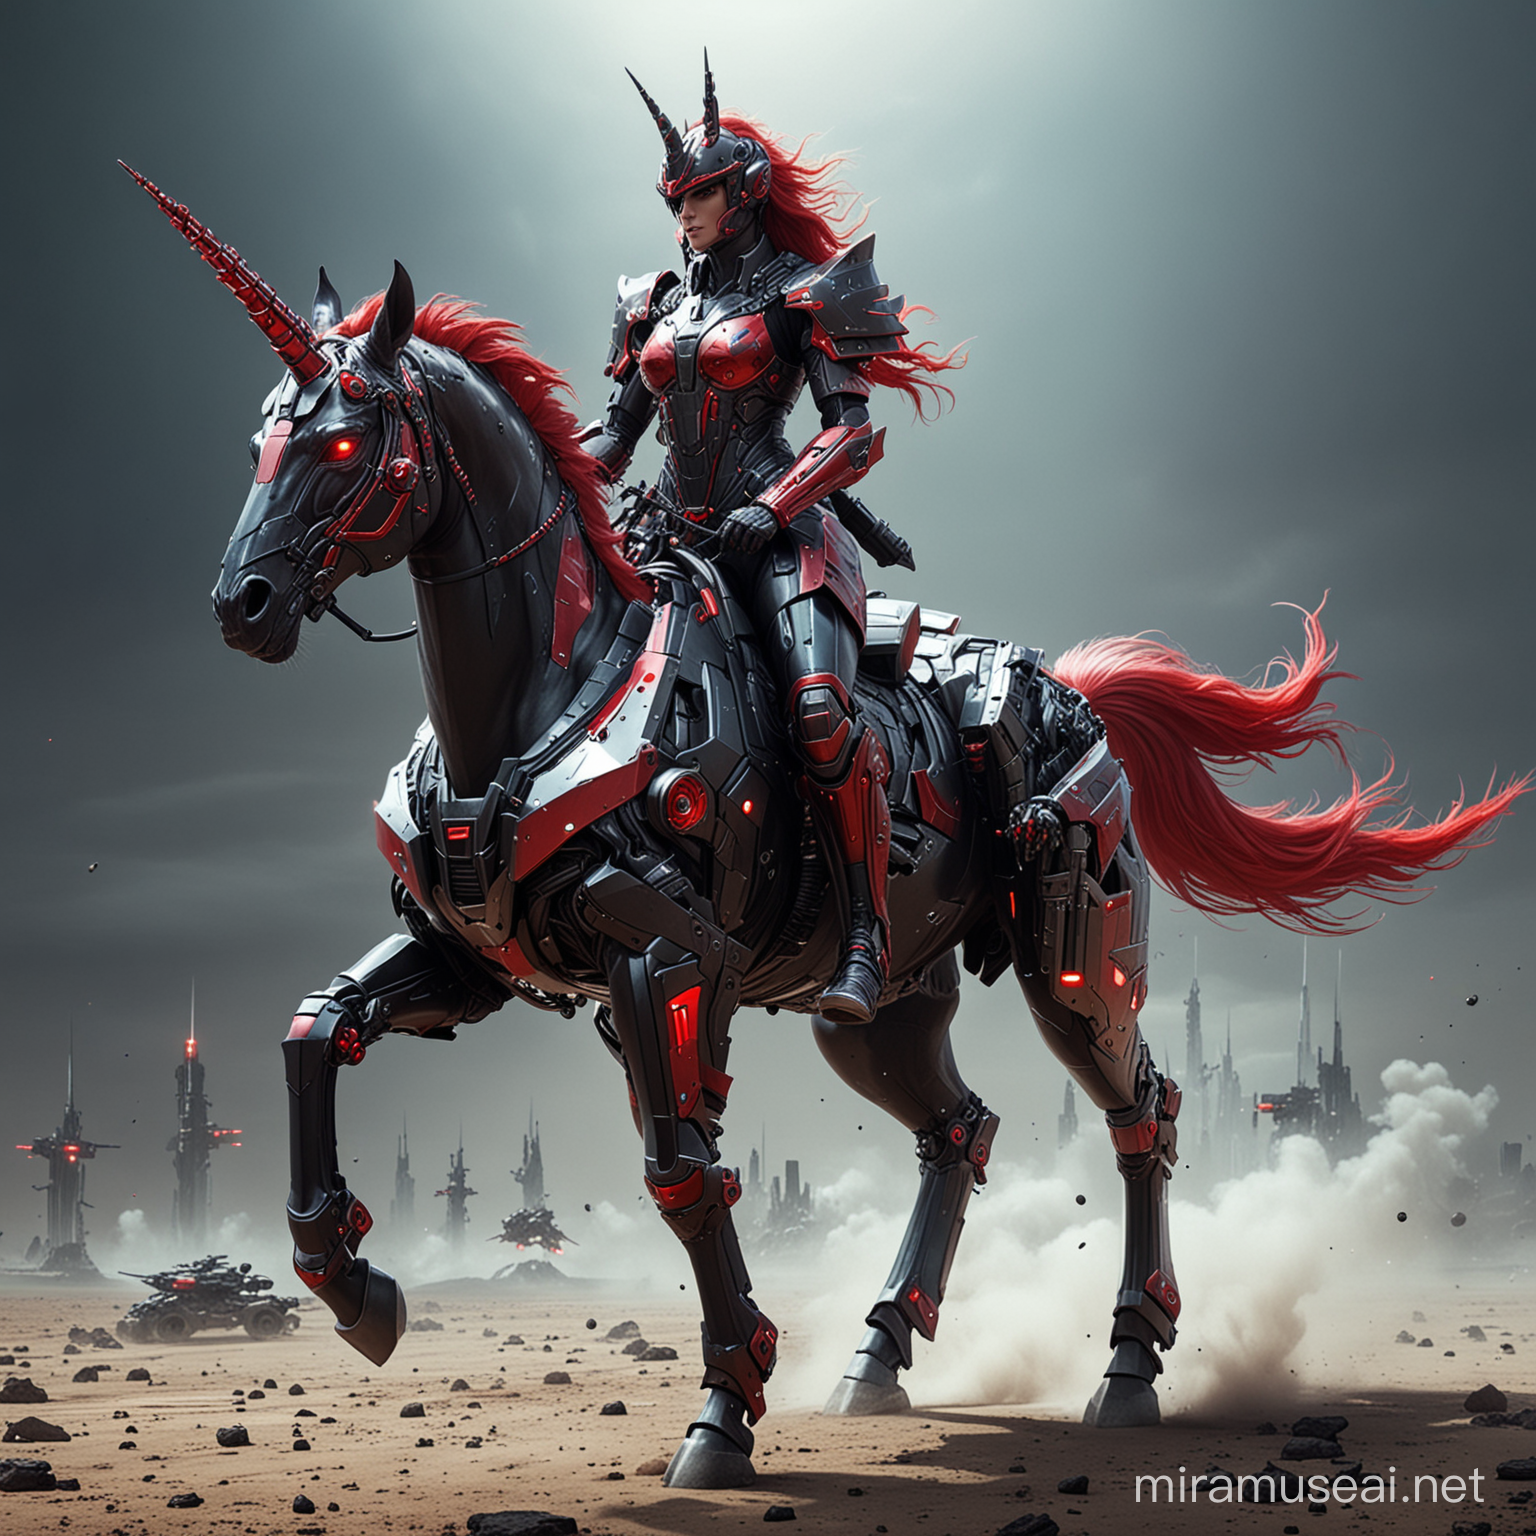 Cyber warrior riding a unicorn with futuristic battle armor, black and red,full body, open planes